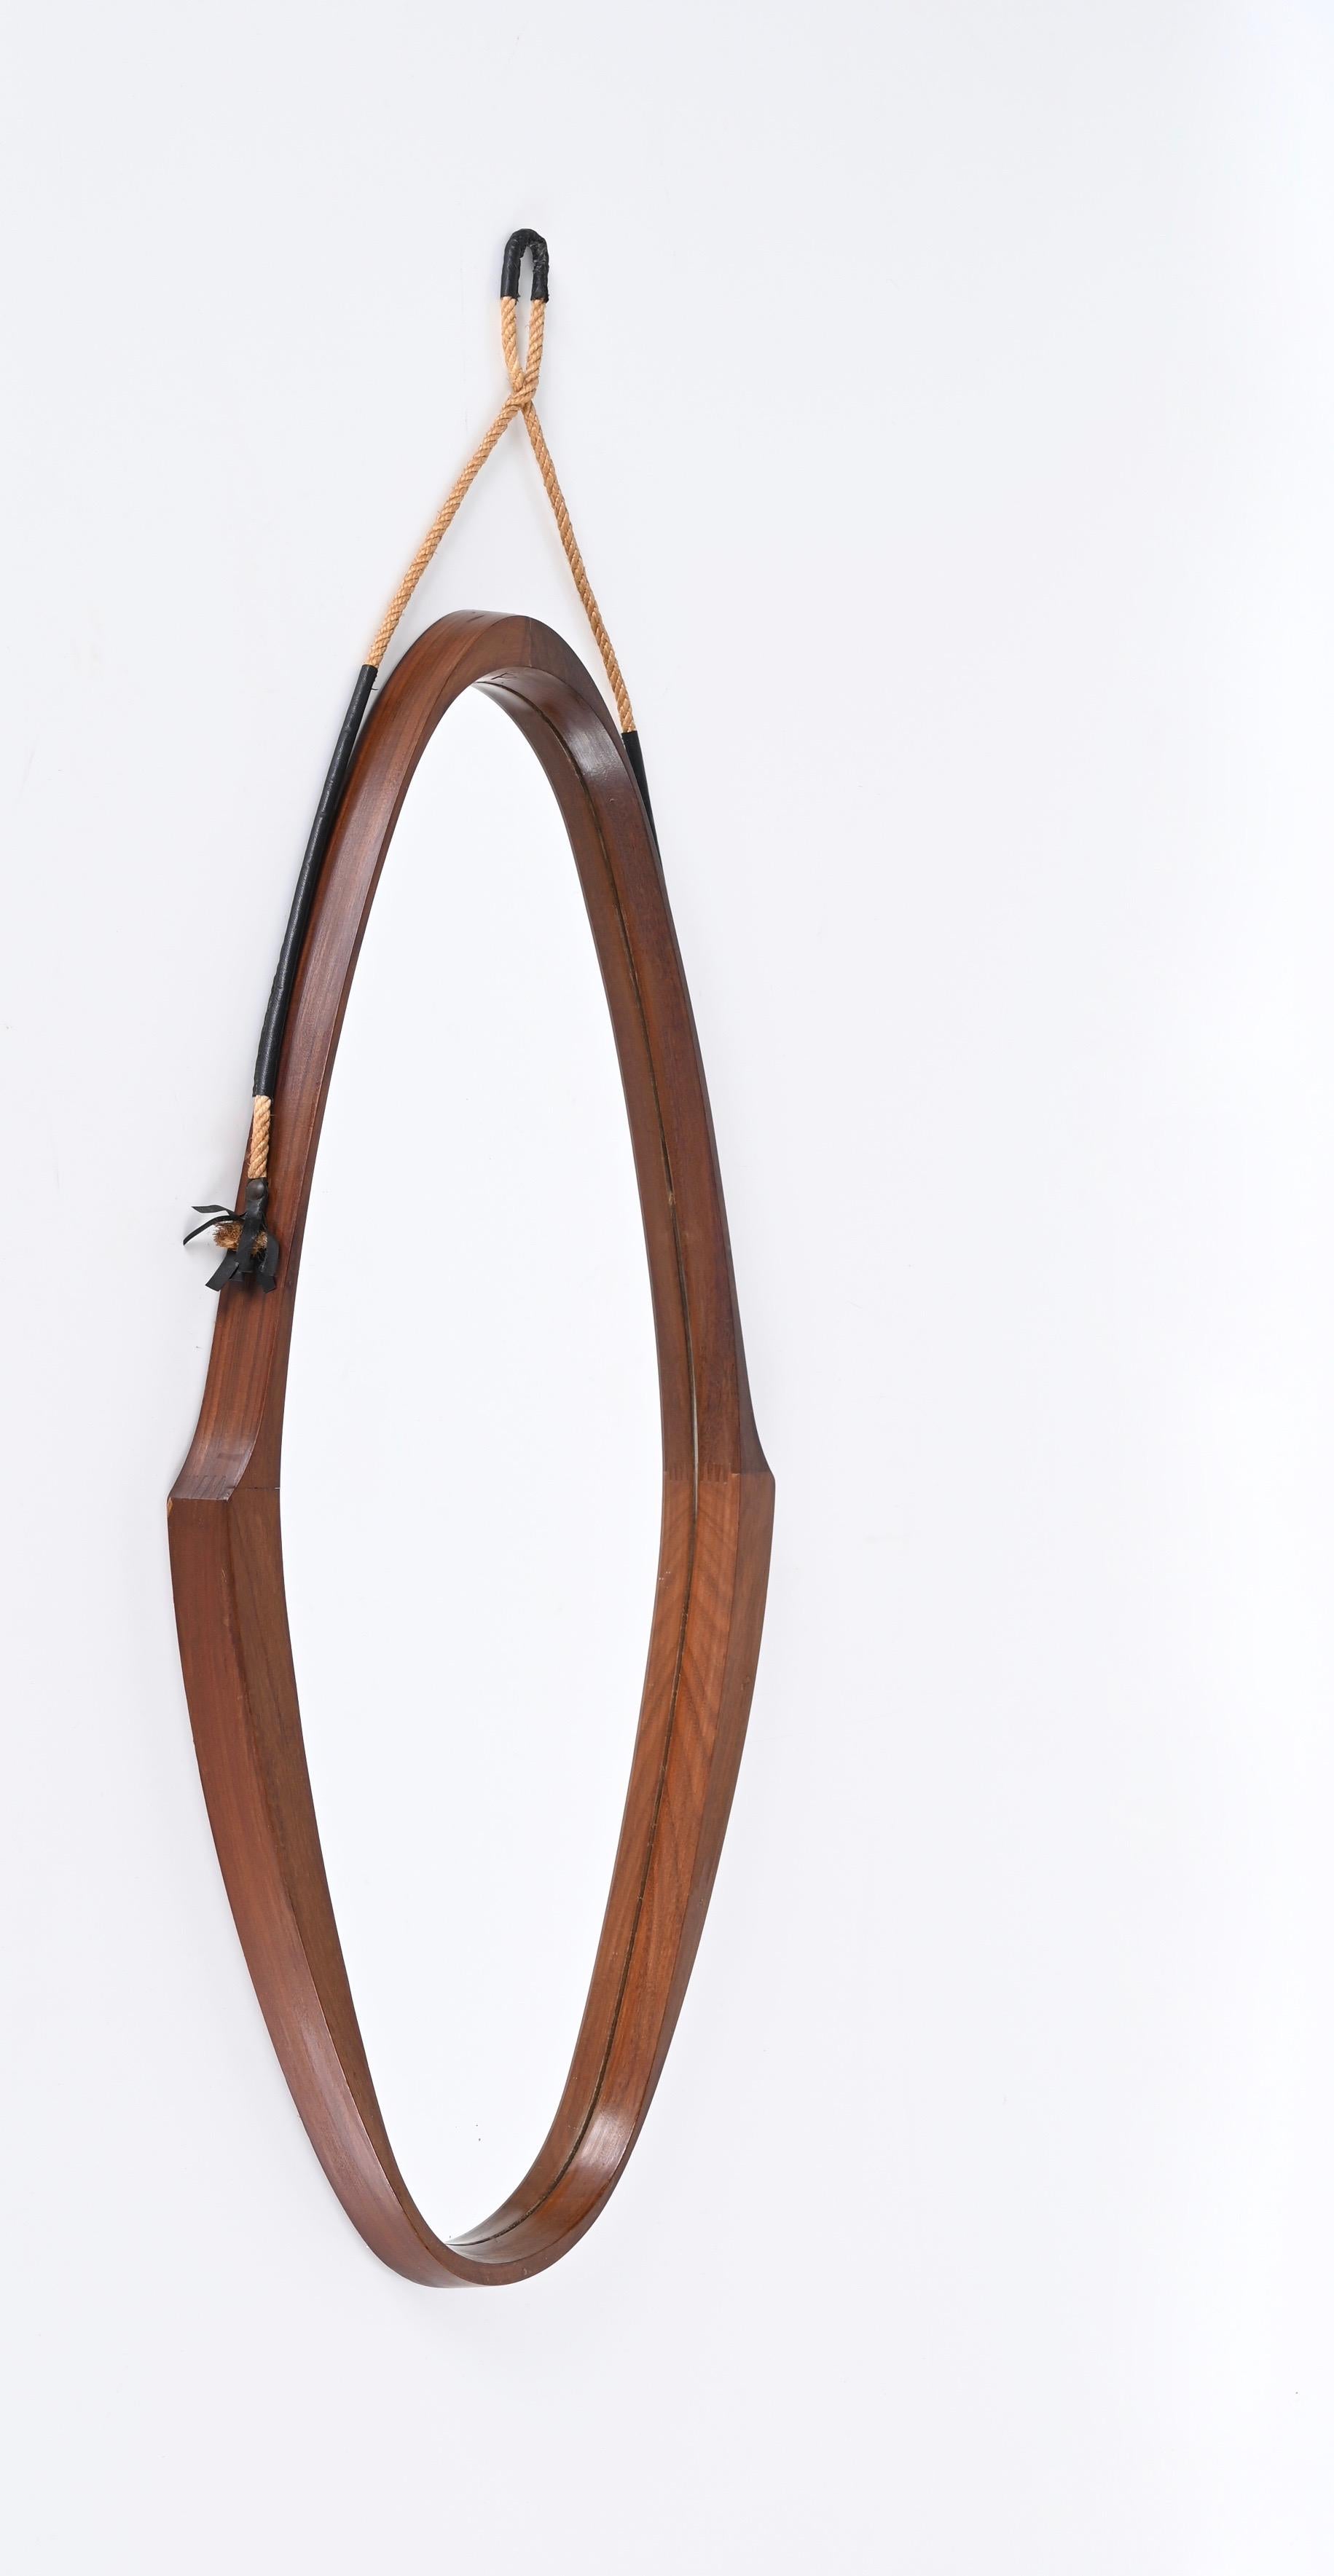 Midcentury Italian Oval Mirror in Curved Teak, Rope and Leather, 1960s 4